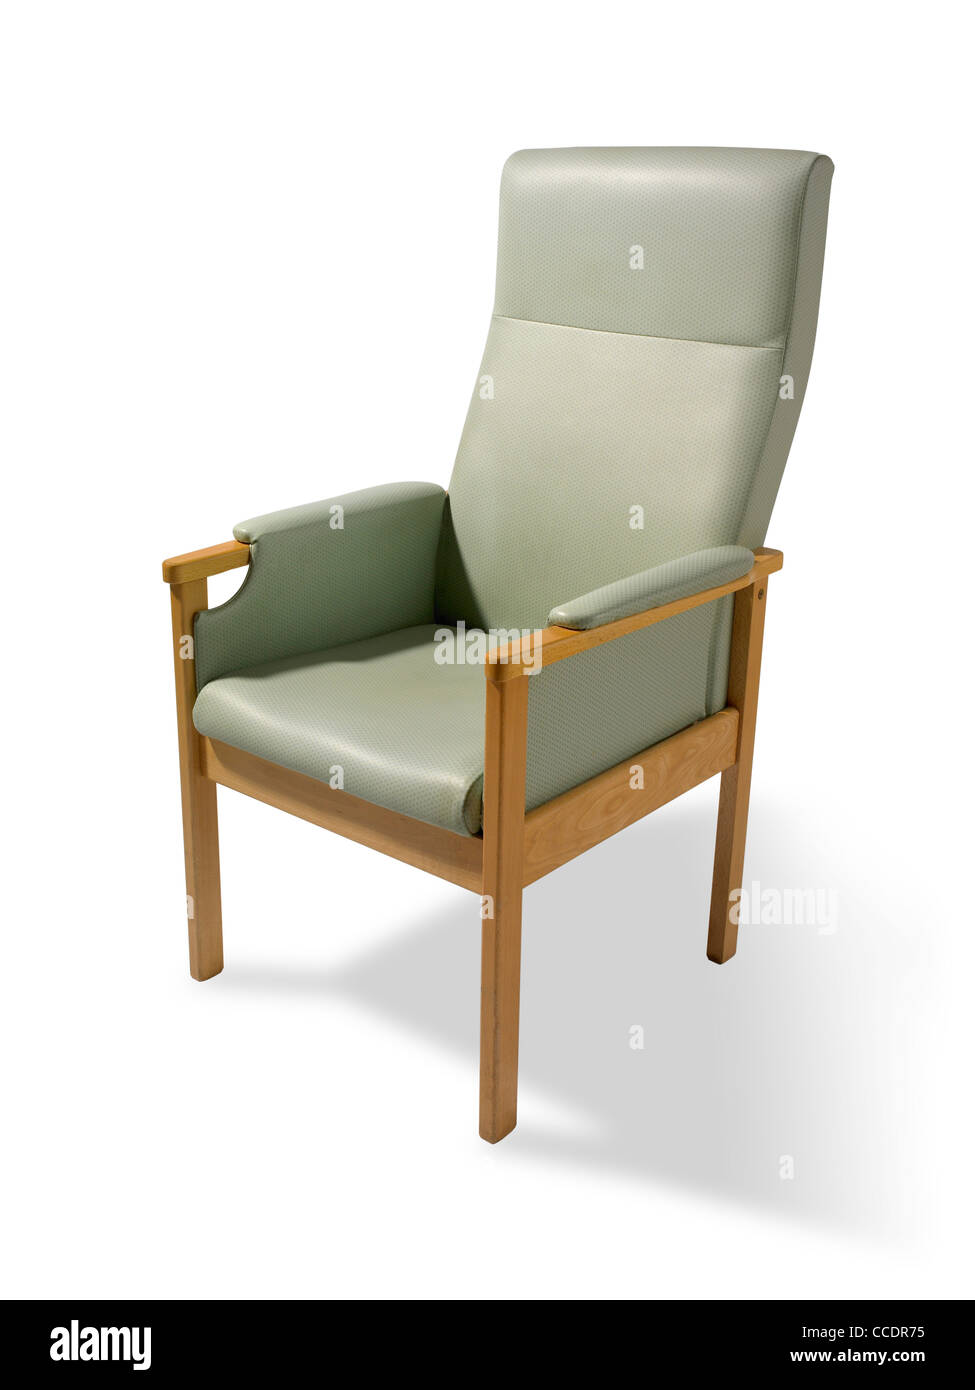 Elderly persons chair Stock Photo